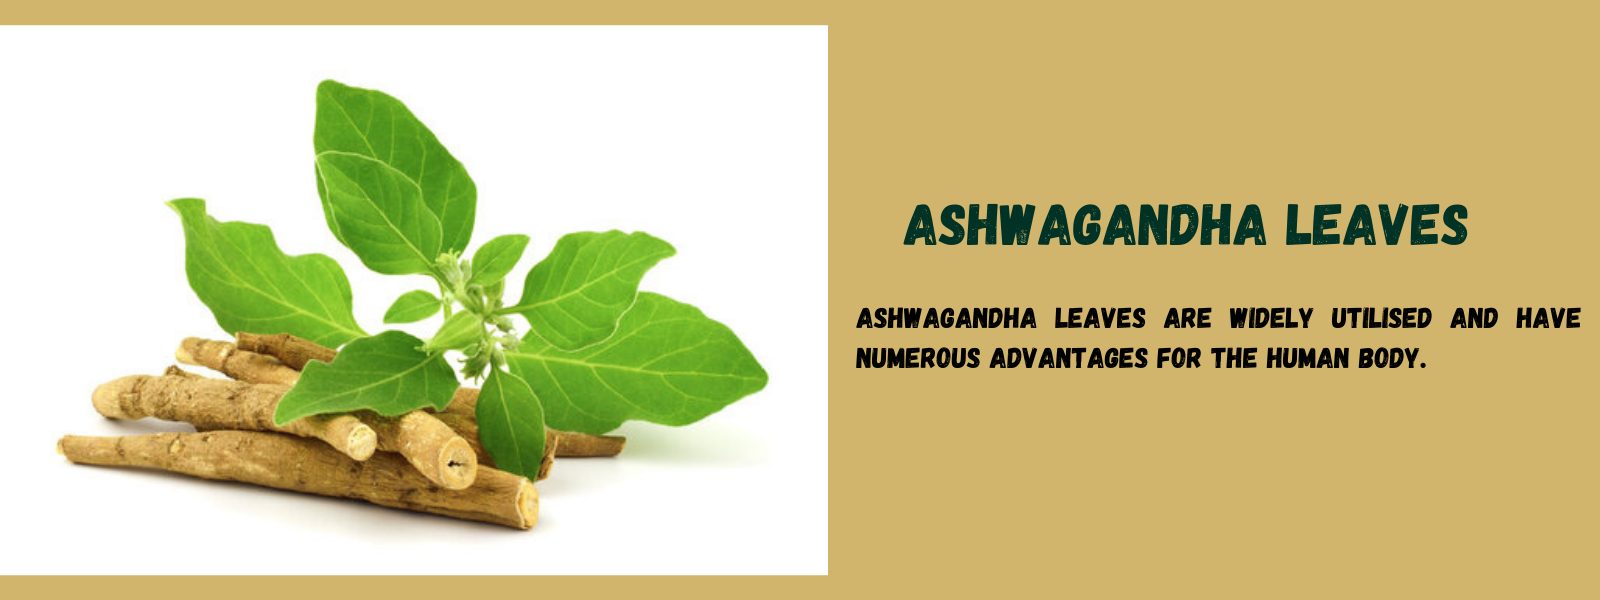 Ashwagandha Leaves - Health Benefits, Uses and Important Facts